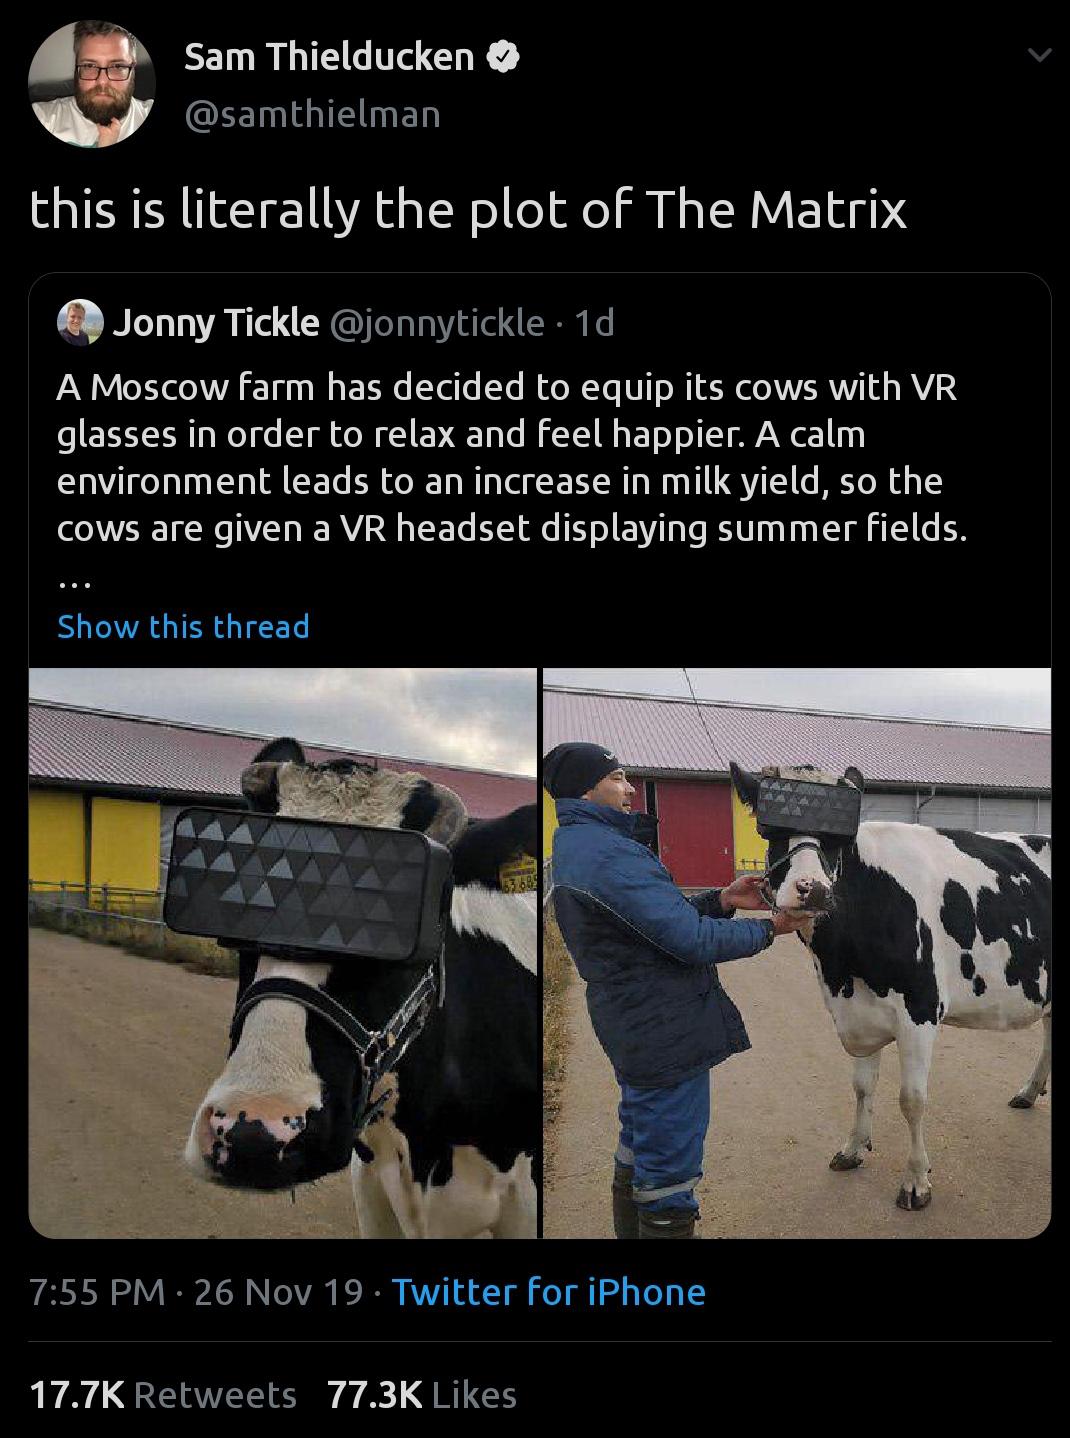 The Matrix but with cows.